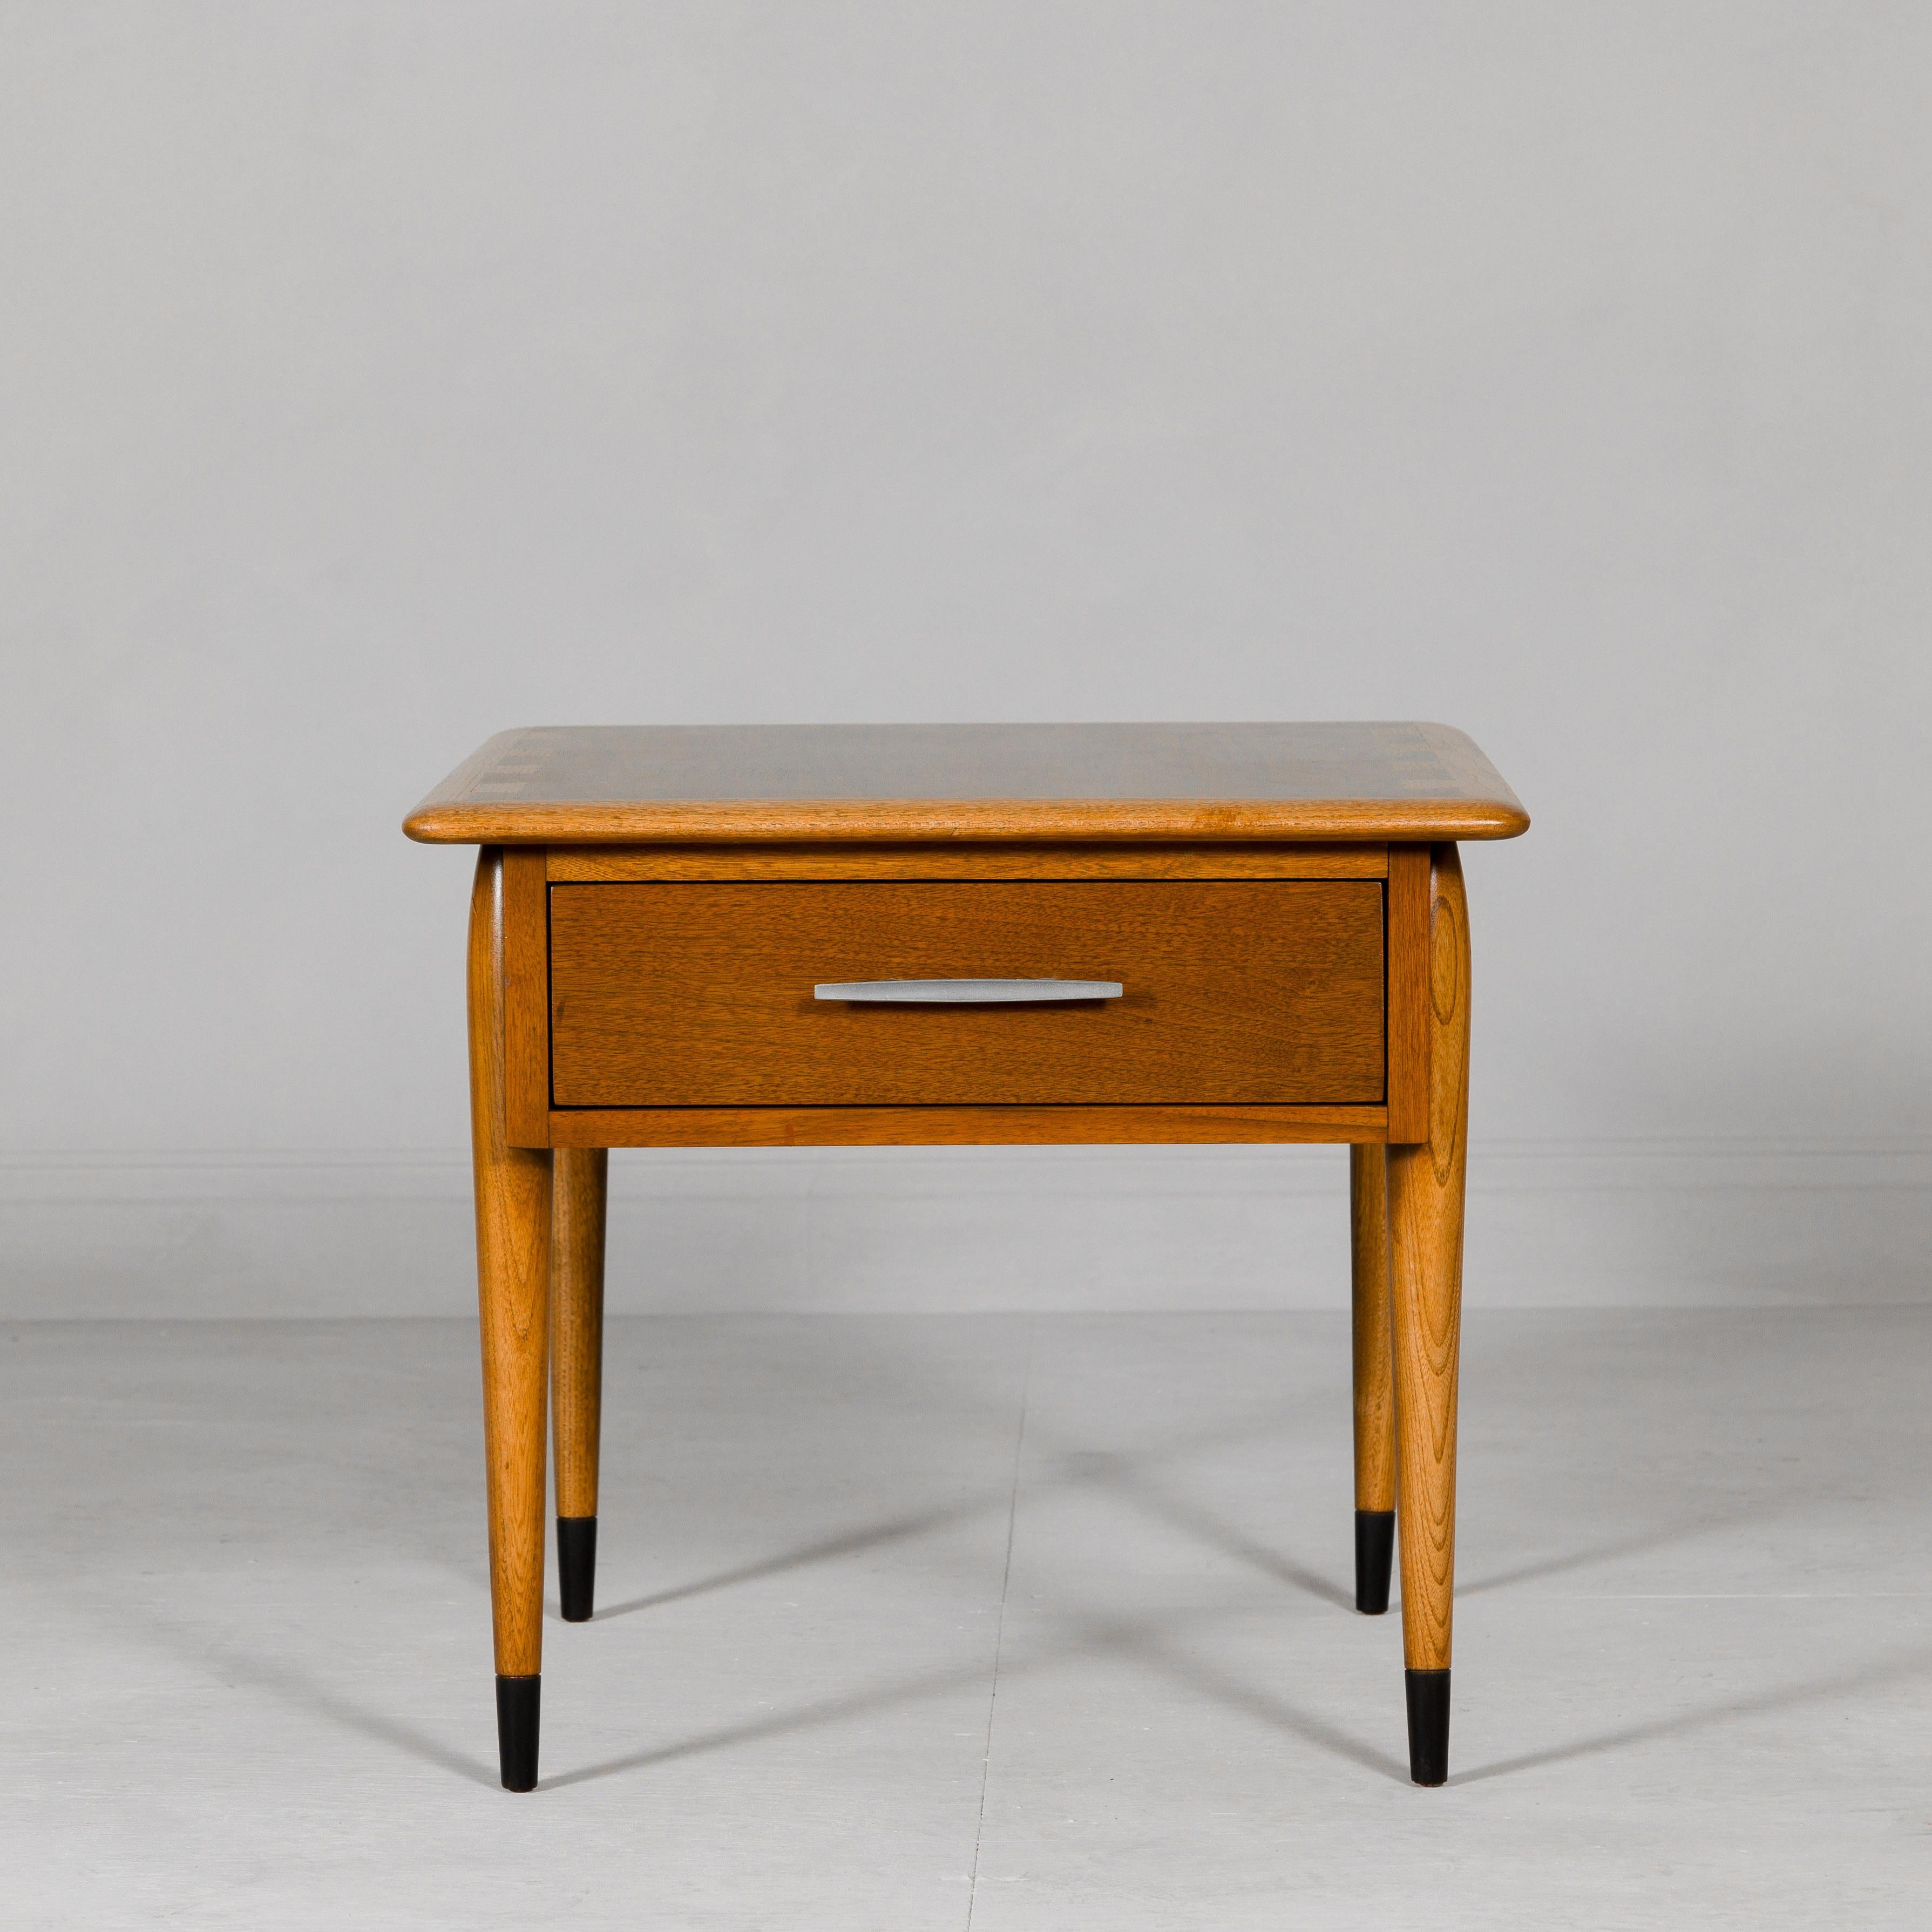 A Lane Altavista Midcentury side table with single drawer and tapering legs. This Lane Altavista Midcentury side table is a superb example of the timeless allure of midcentury modern design. Its elegant simplicity, characterized by clean lines and a